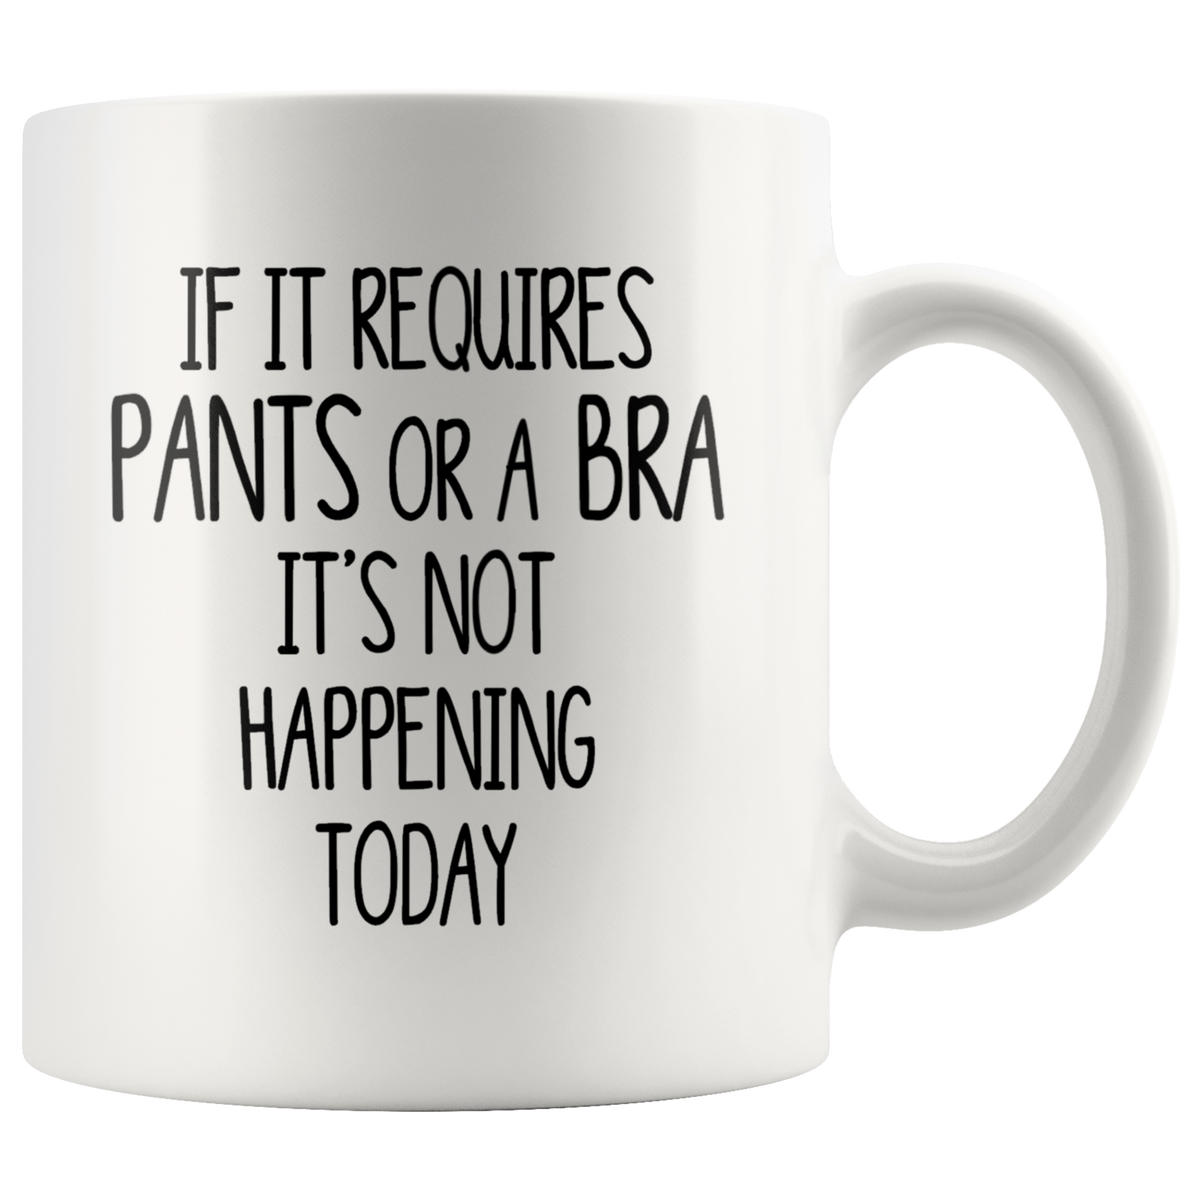 Funny Mug for Women If It Requires Pants or a Bra